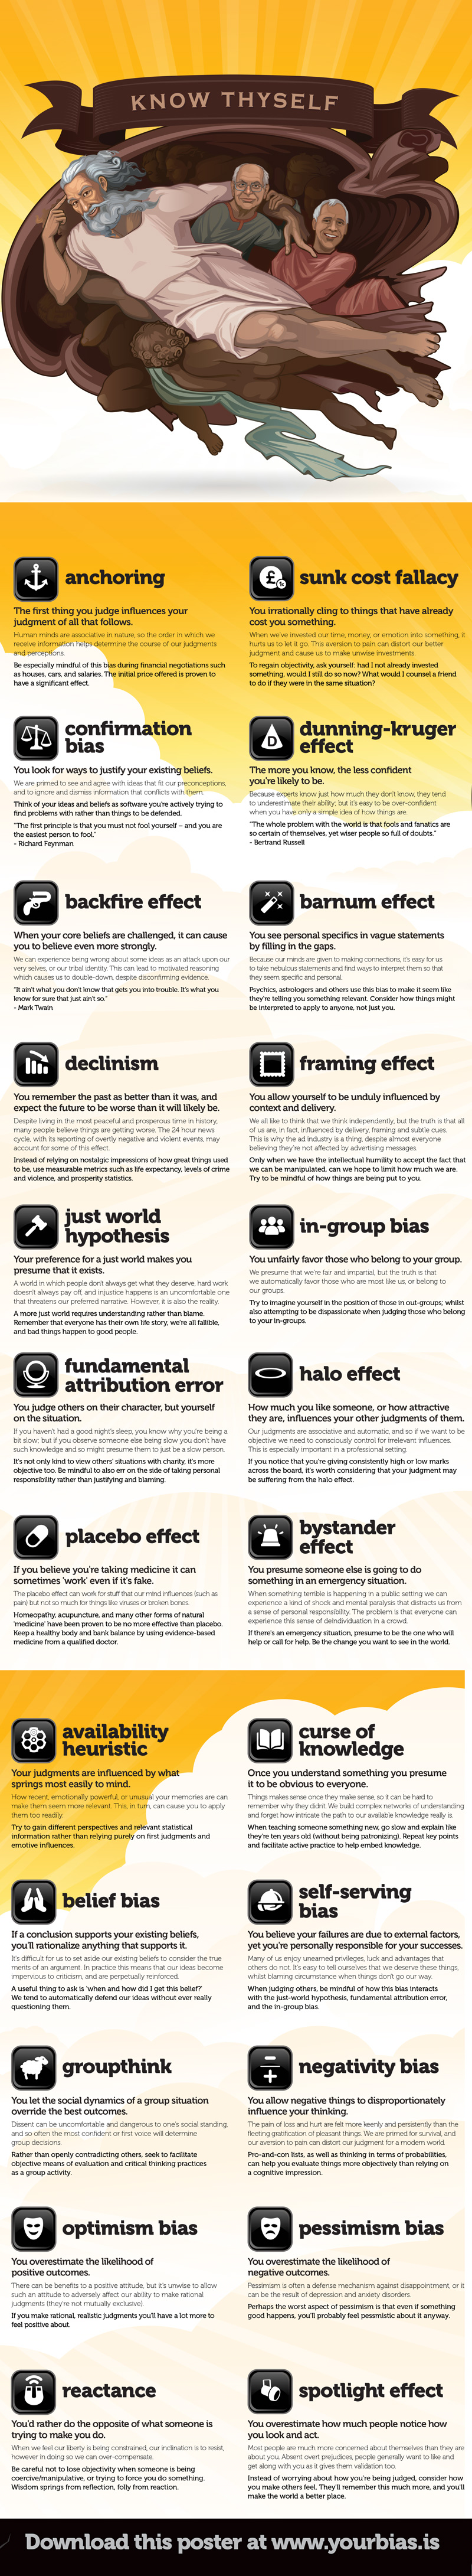 24 Cognitive Biases You Need To Stop Making [Infographic]